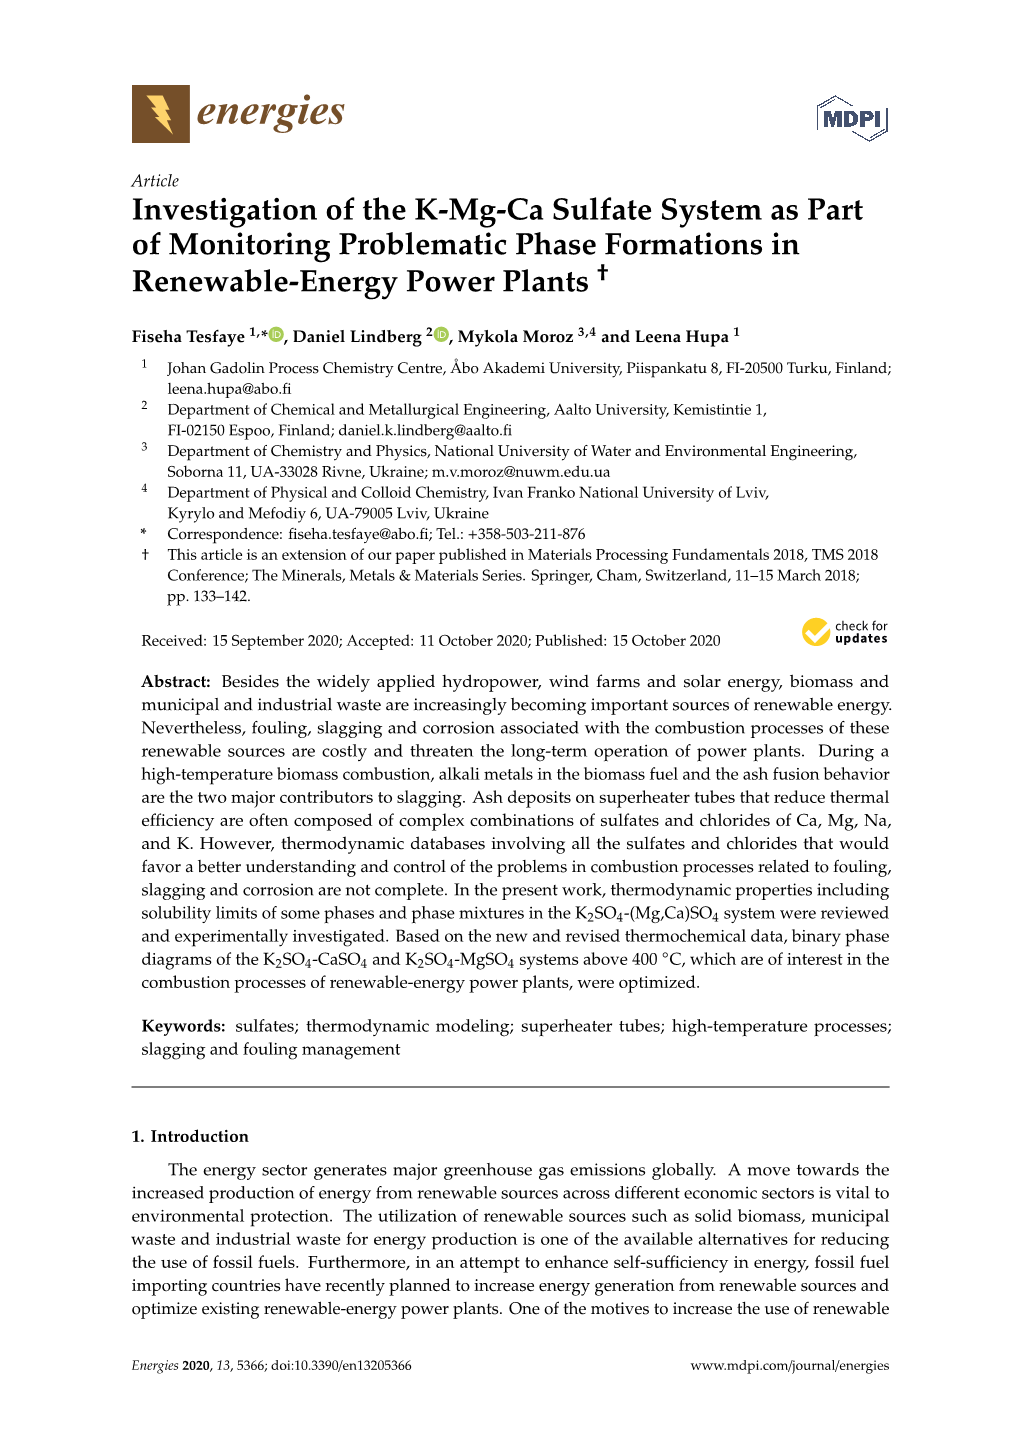 Investigation of the K-Mg-Ca Sulfate System As Part of Monitoring Problematic Phase Formations in † Renewable-Energy Power Plants